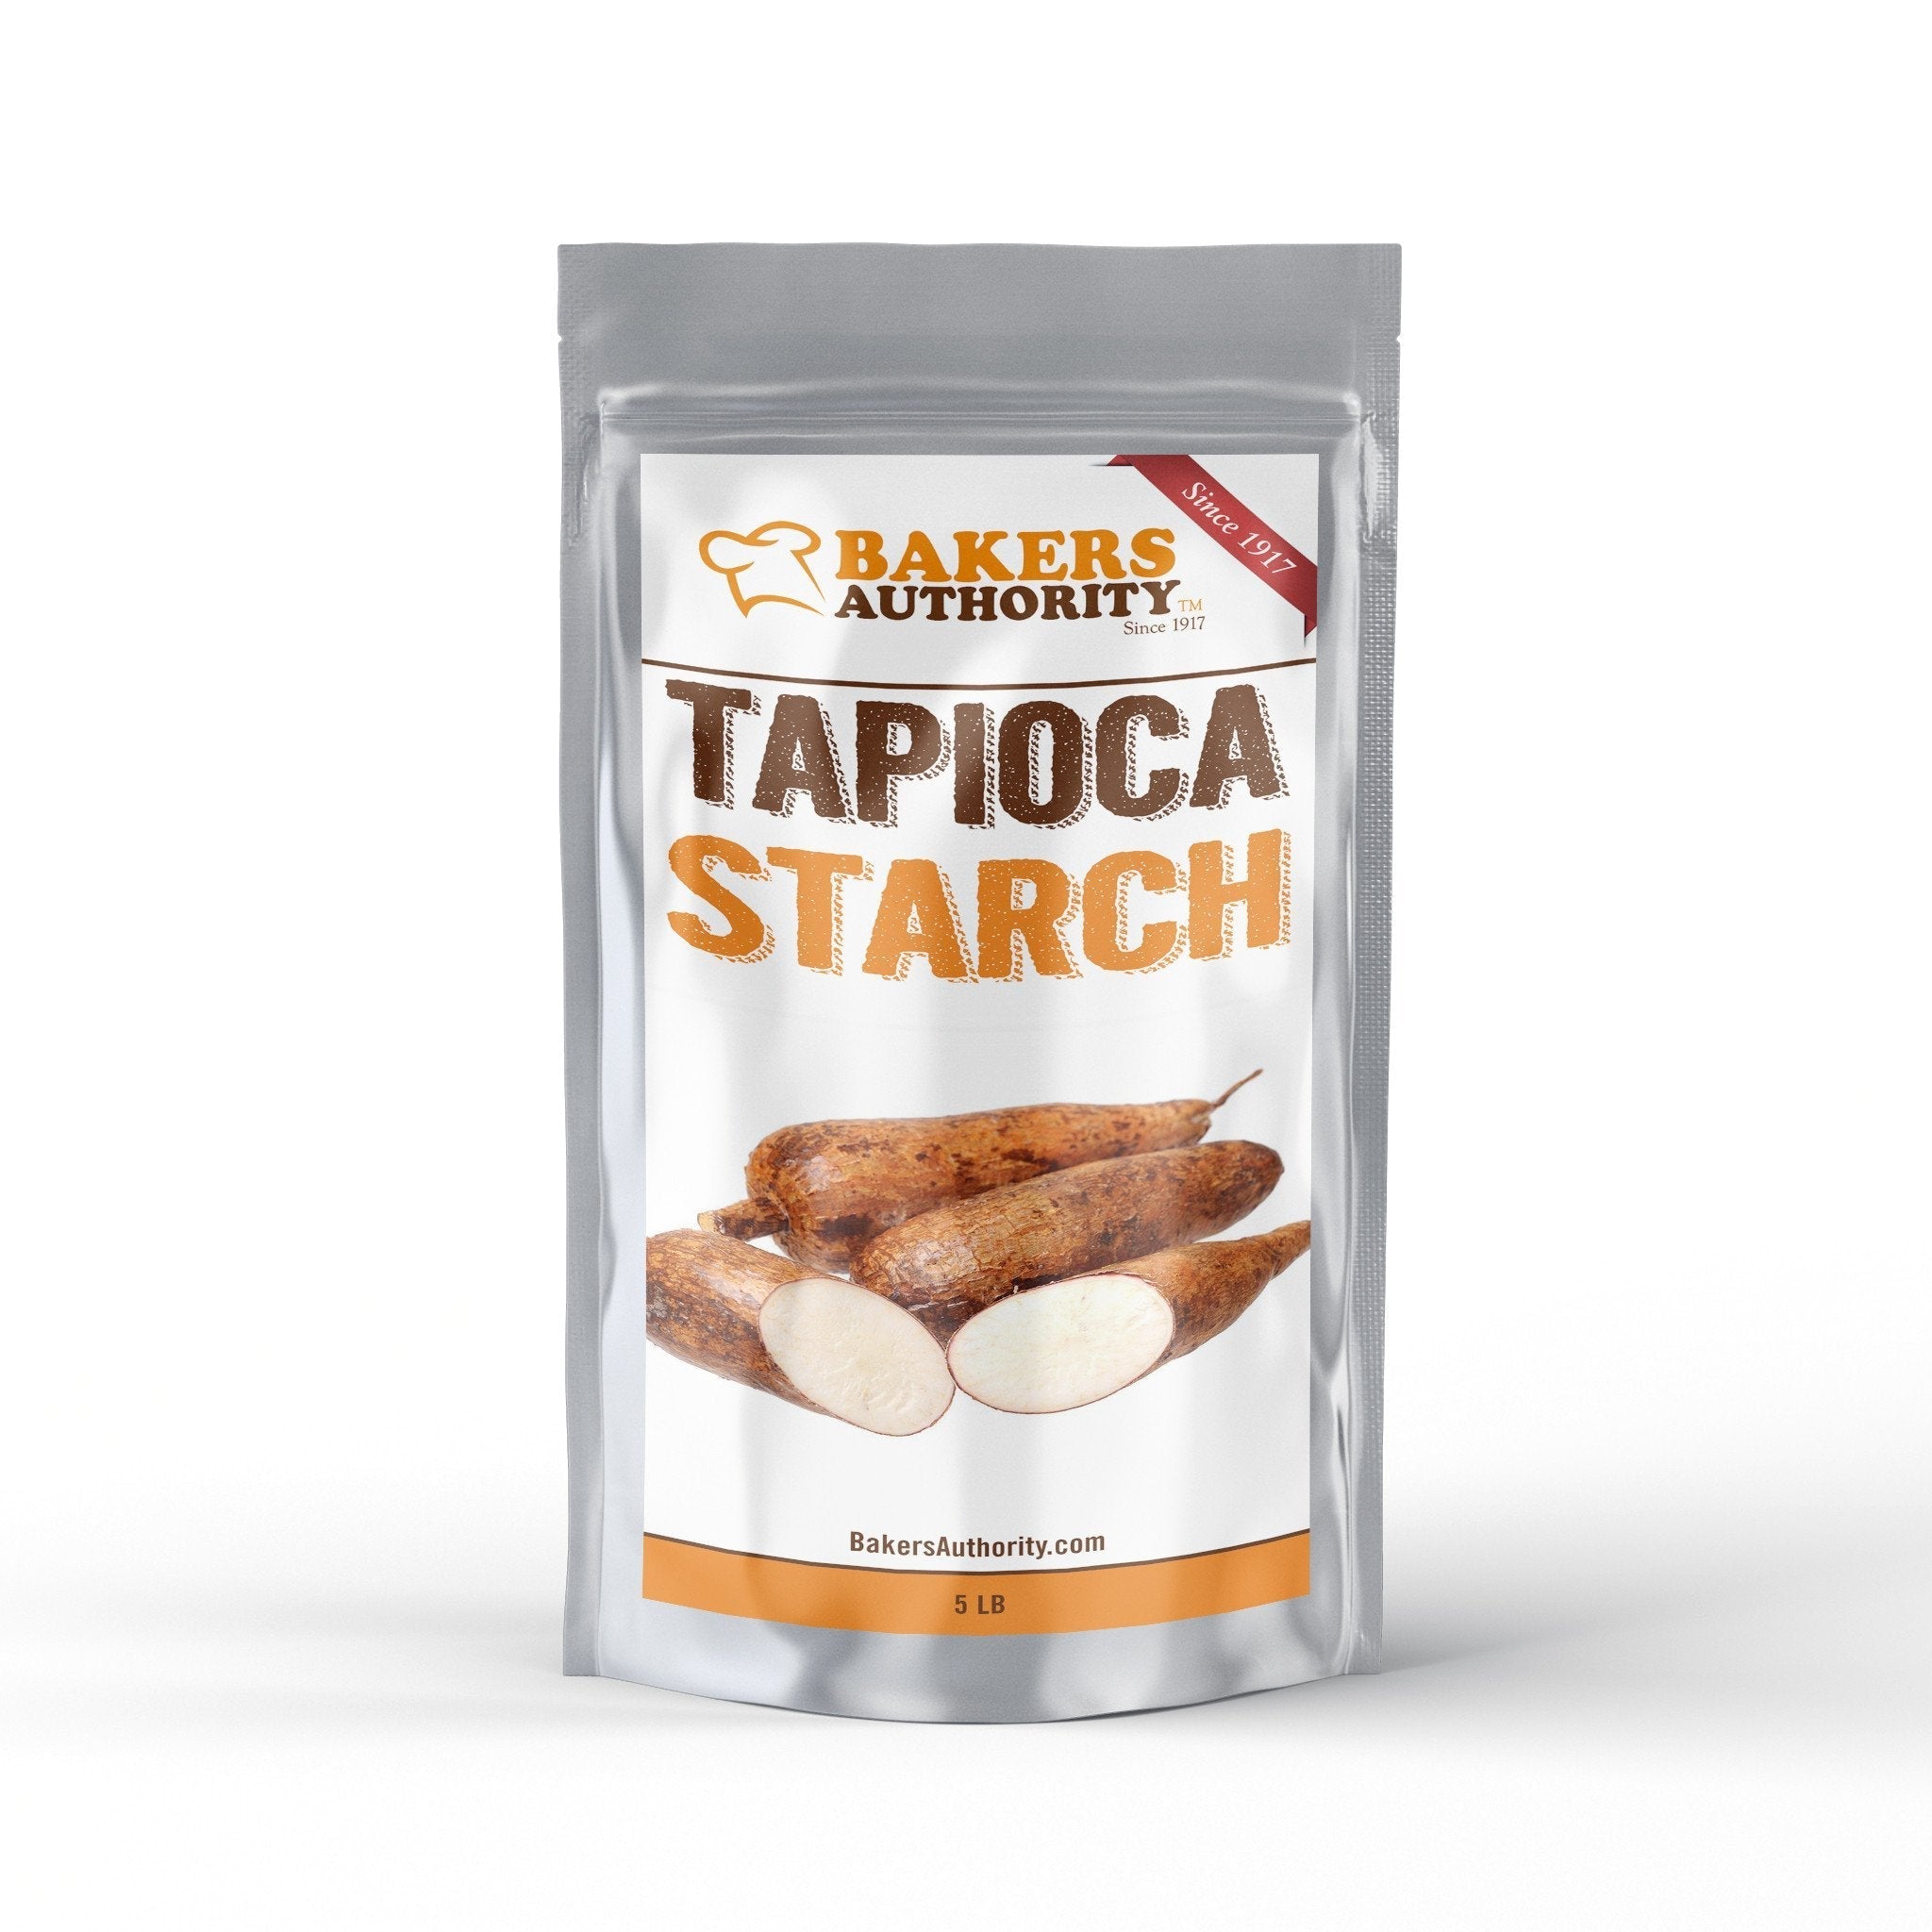 What are the benefits of eating tapioca flour?